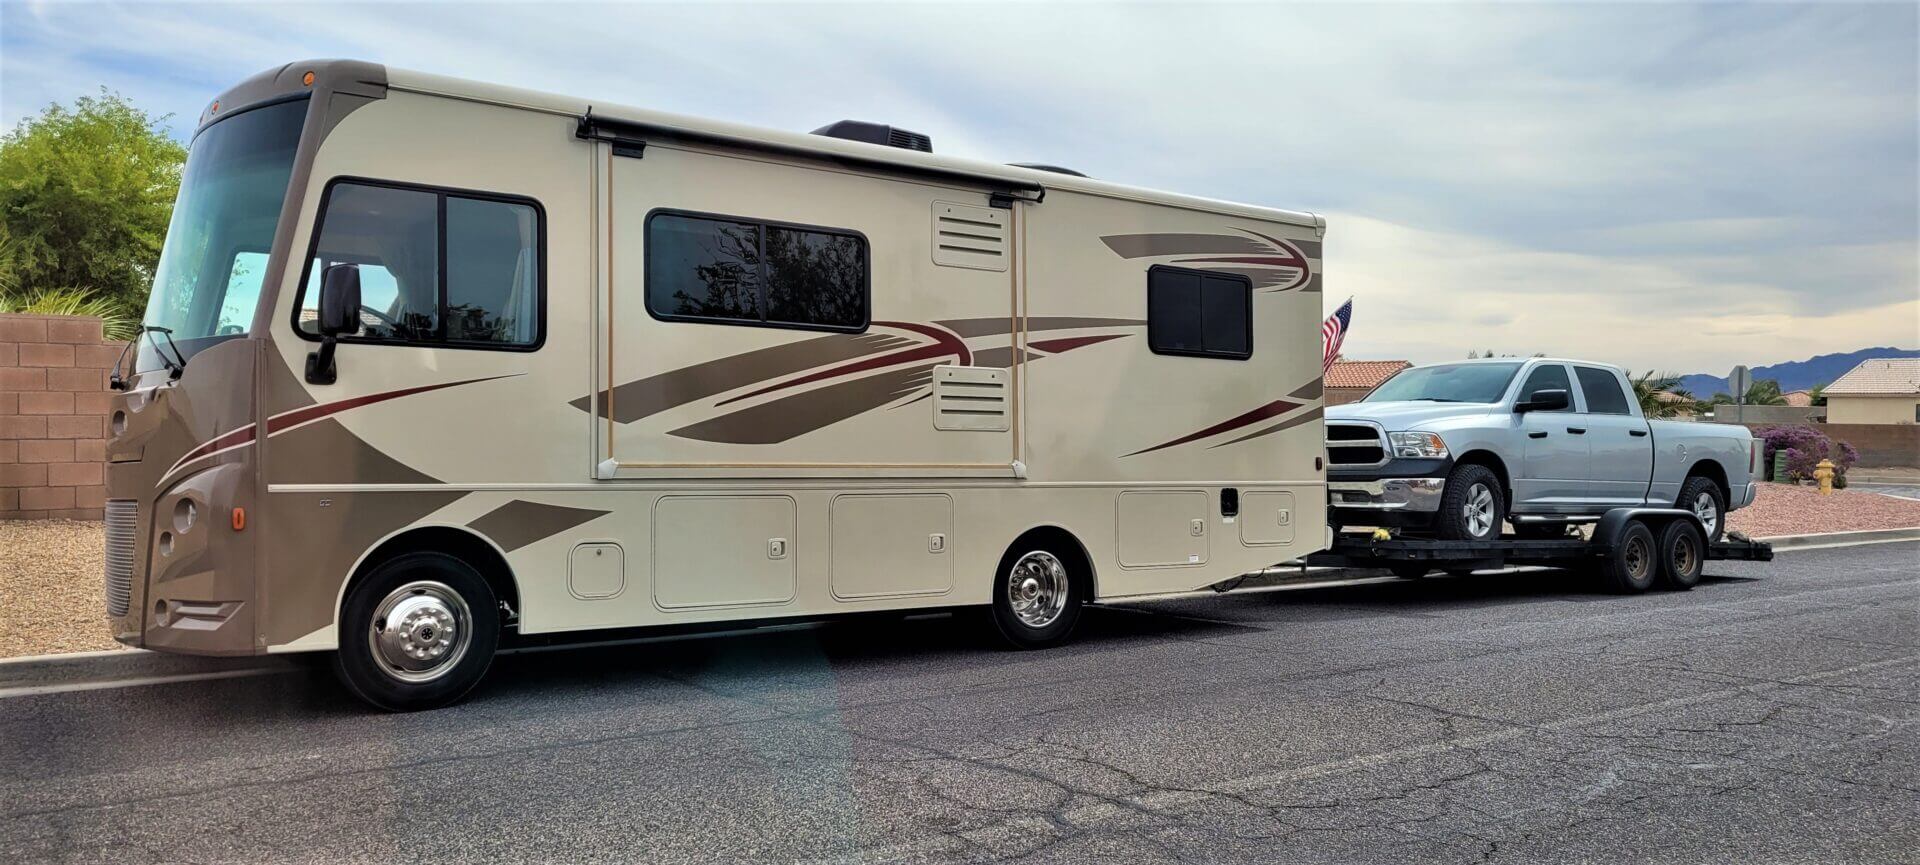 How To Hook Up Your RV At A Campsite (and Some Pro Tips)